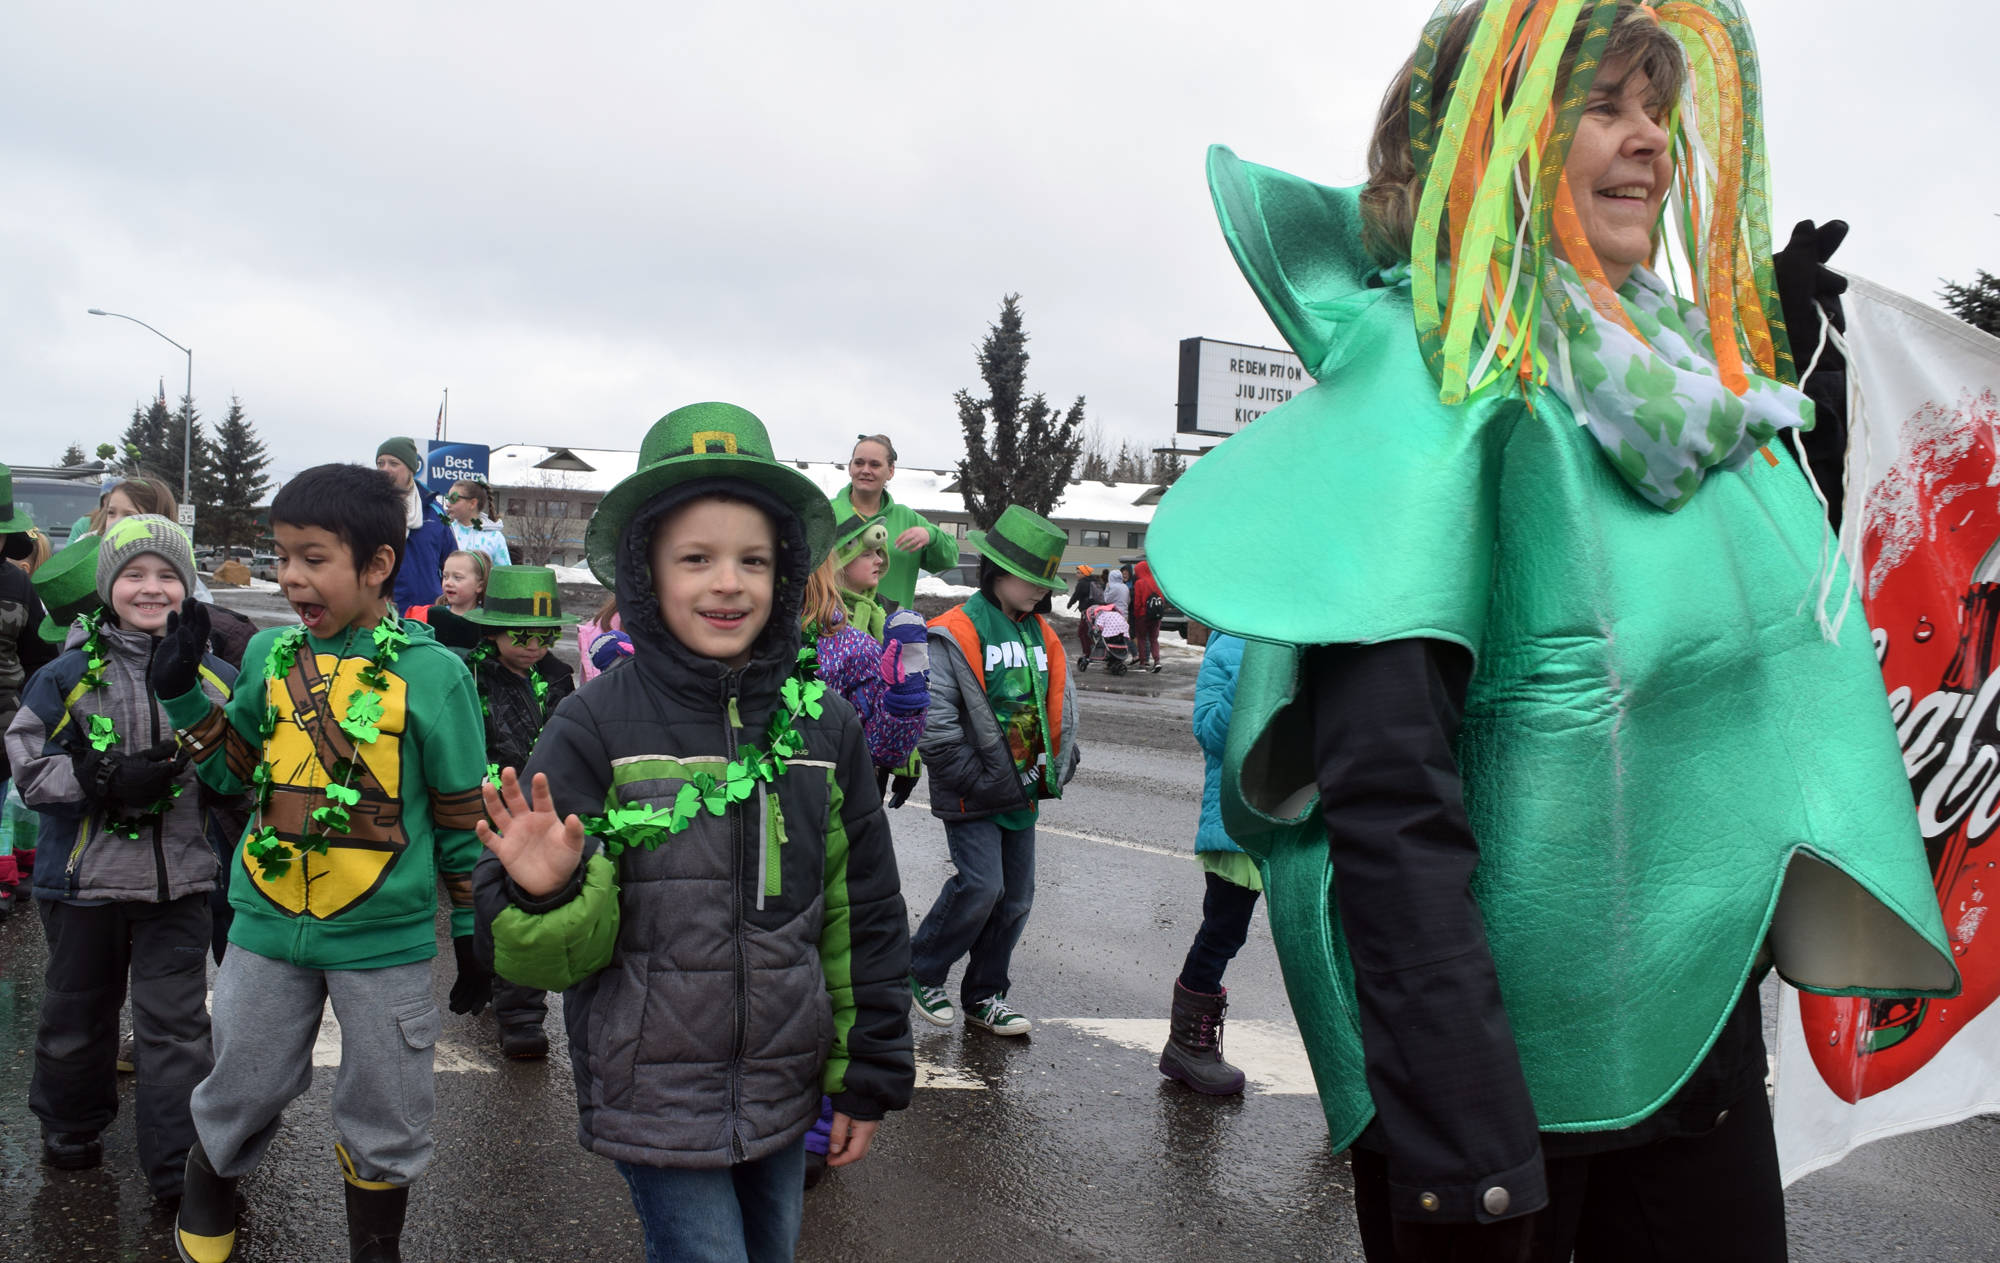 Kalifornsky Beach Elementary School’s first grade class marchs in the Soldotna St. Patrick’s Day parade along the Kenai Spur Highway on Saturday. (Photo by Kat Sorensen/Peninsula Clarion)